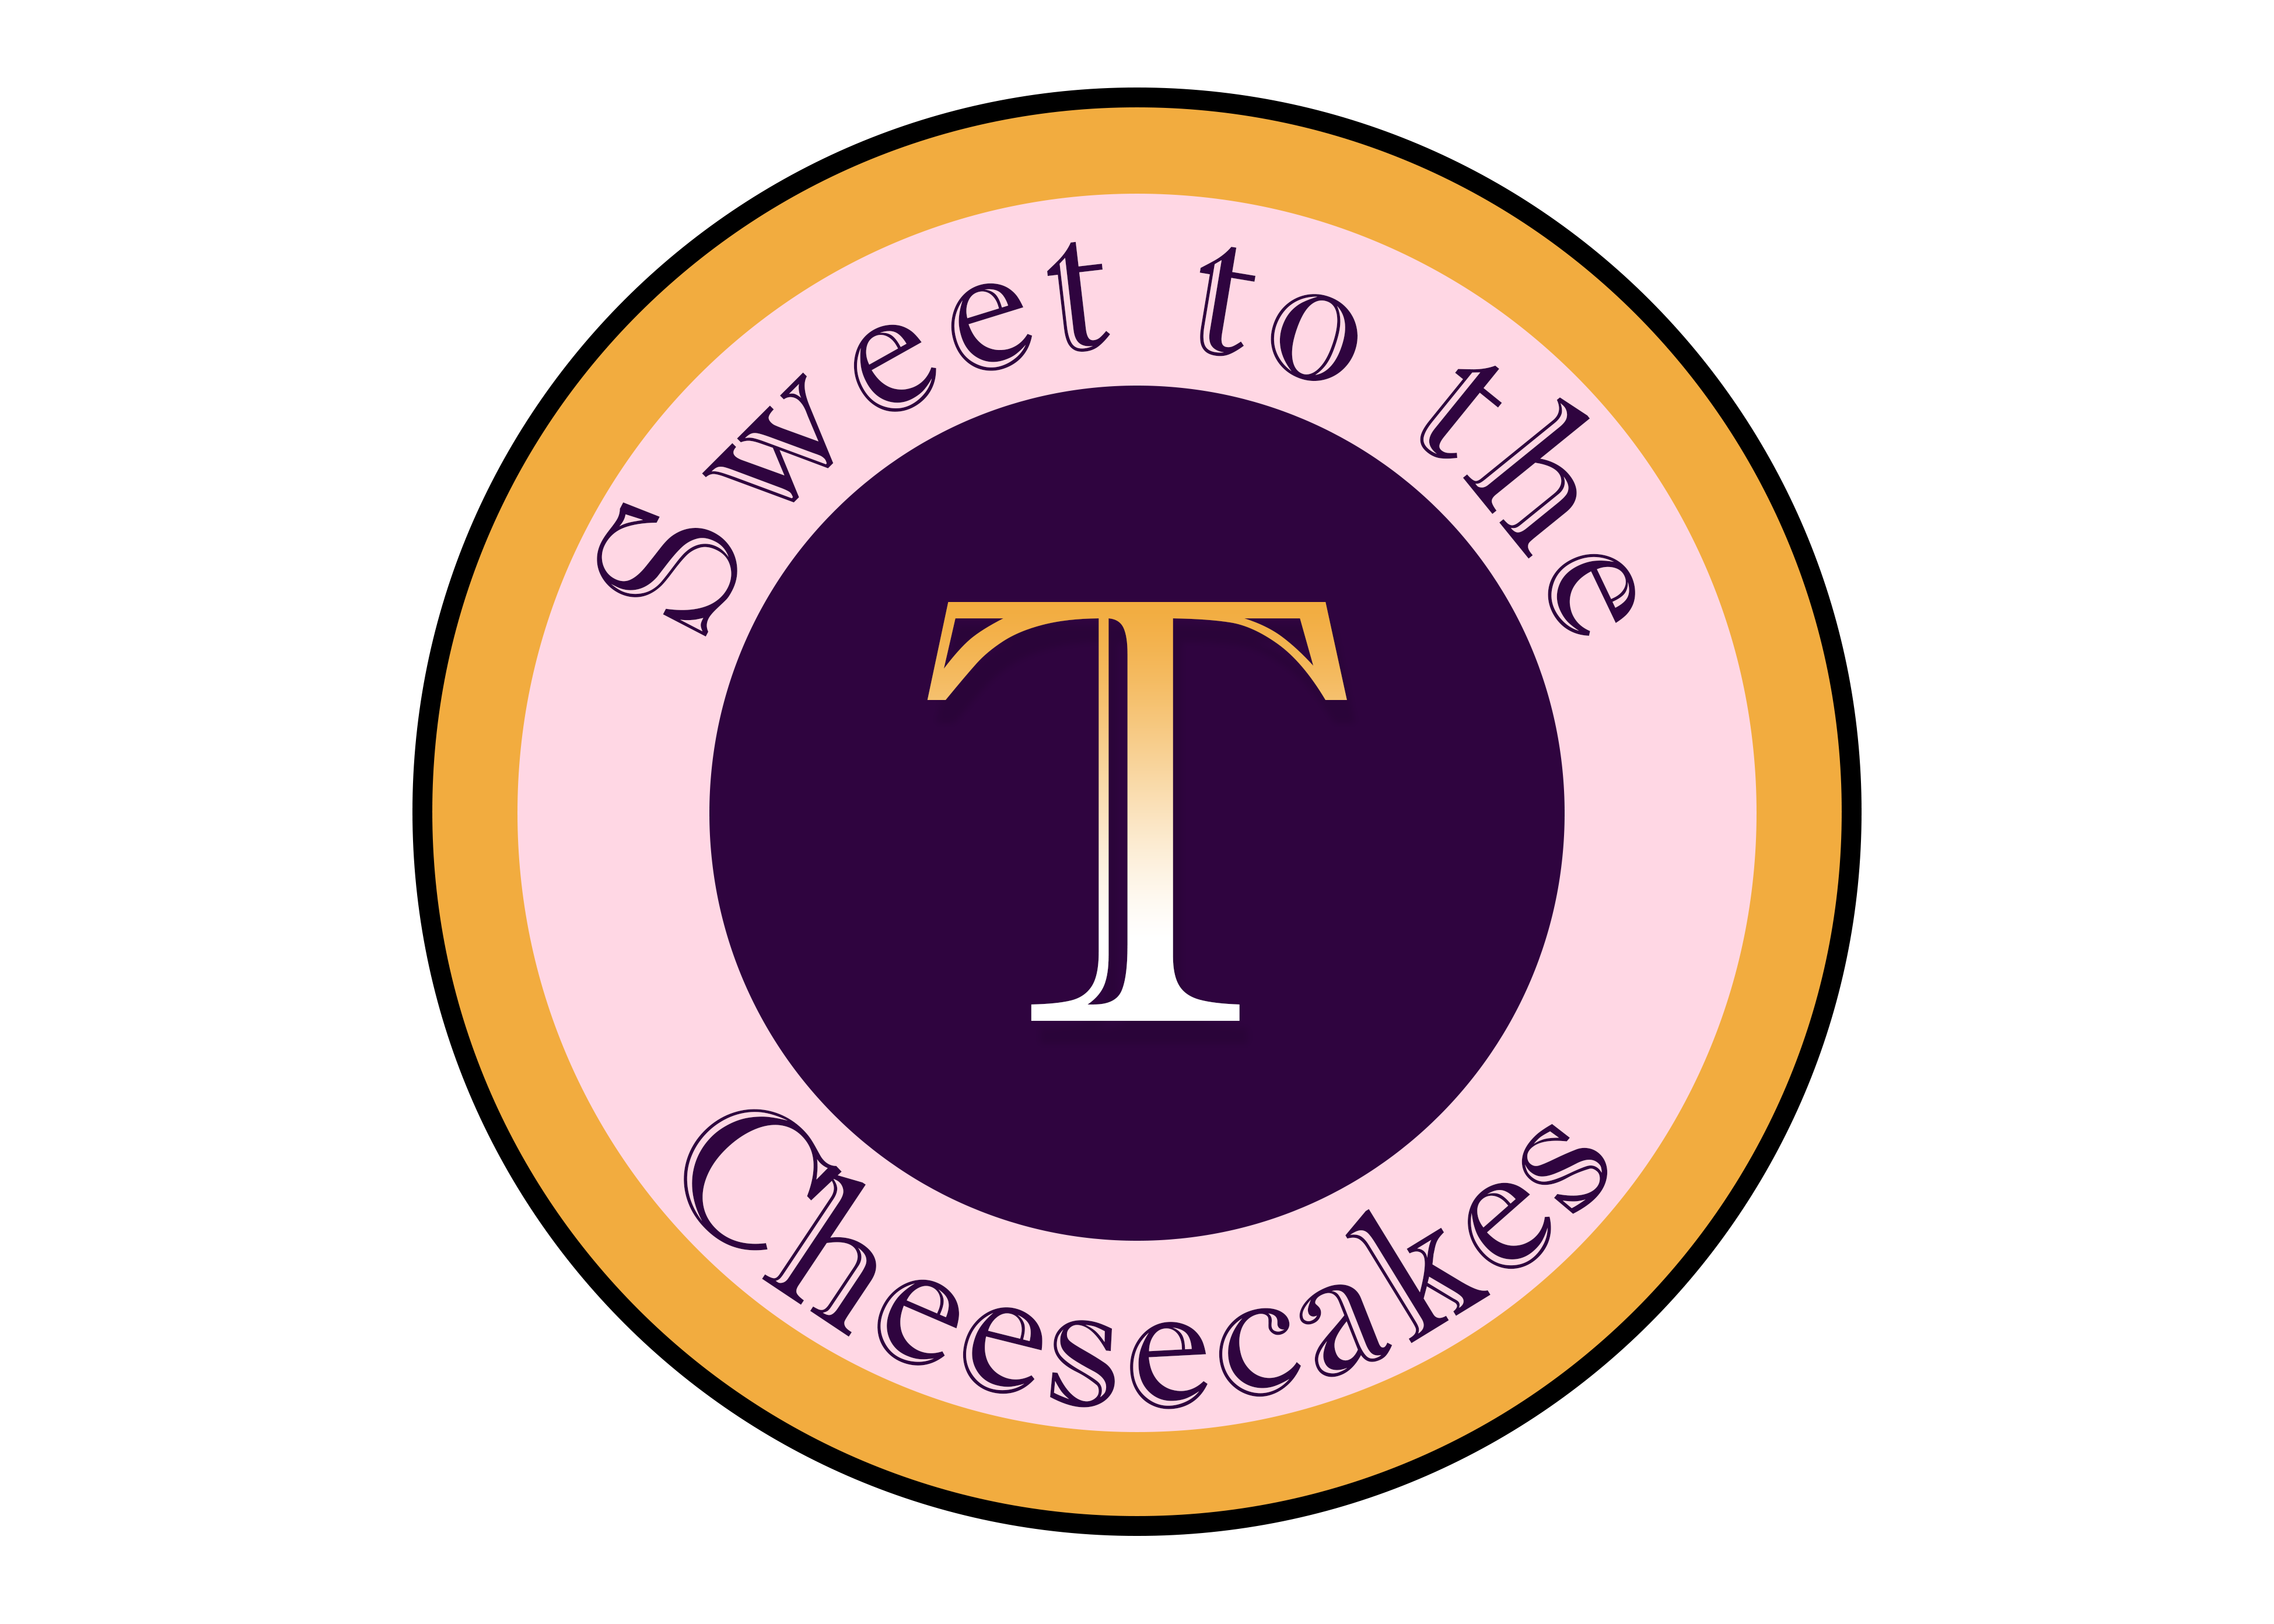 Sweet to the T Cheesecakes